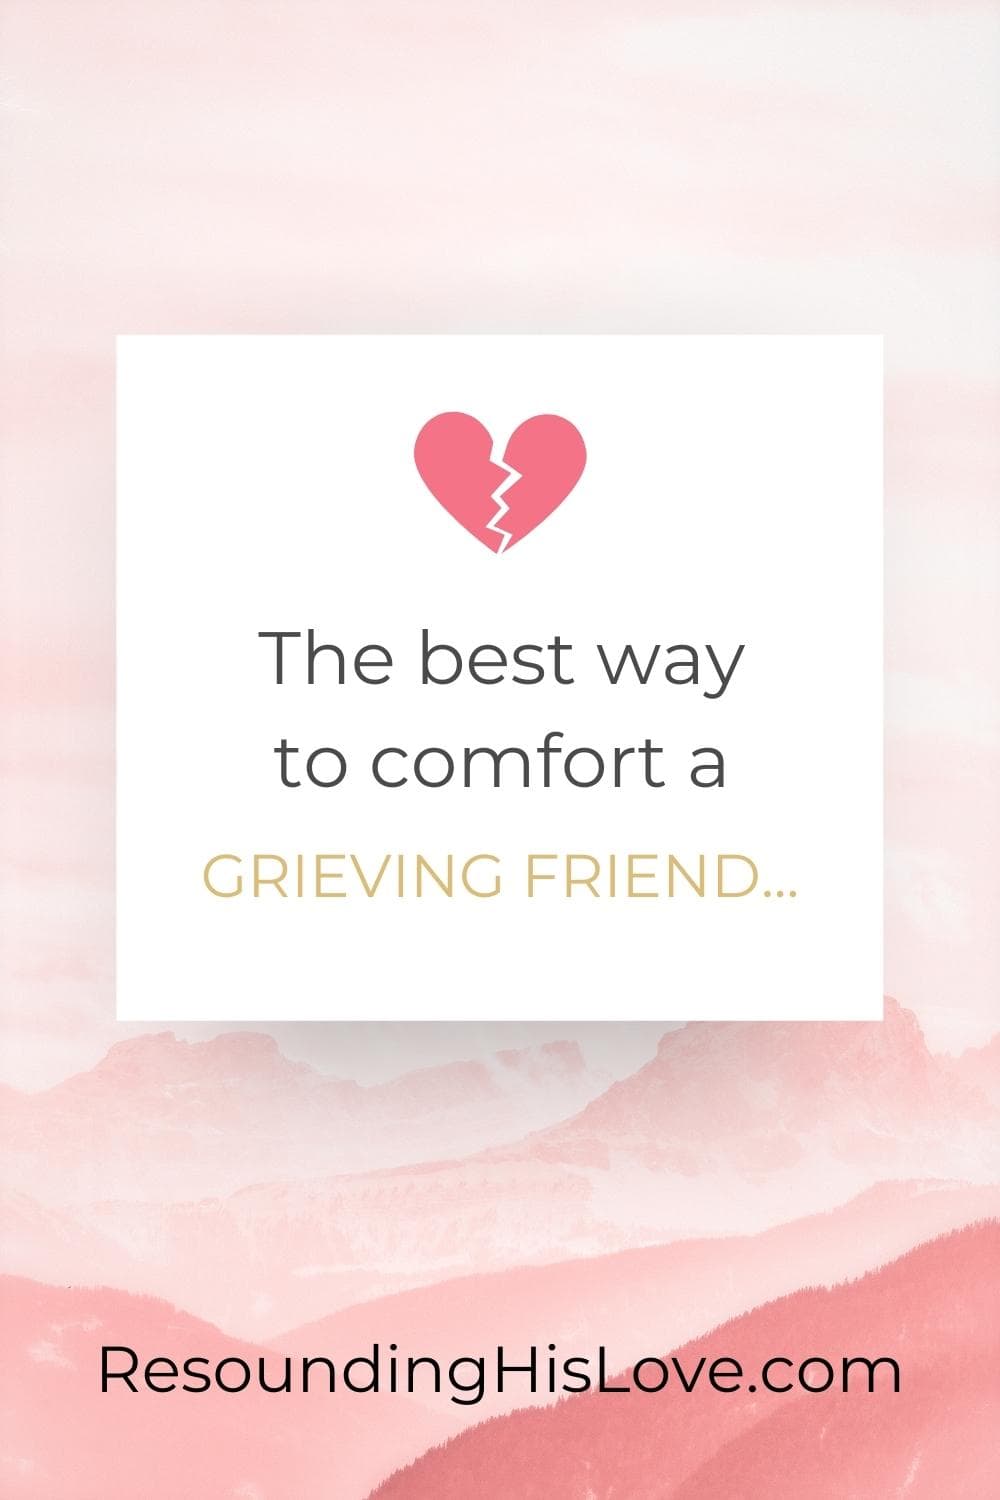 a light pink background with a dark pink heart in the center with text the best way to comfort a grieving friend